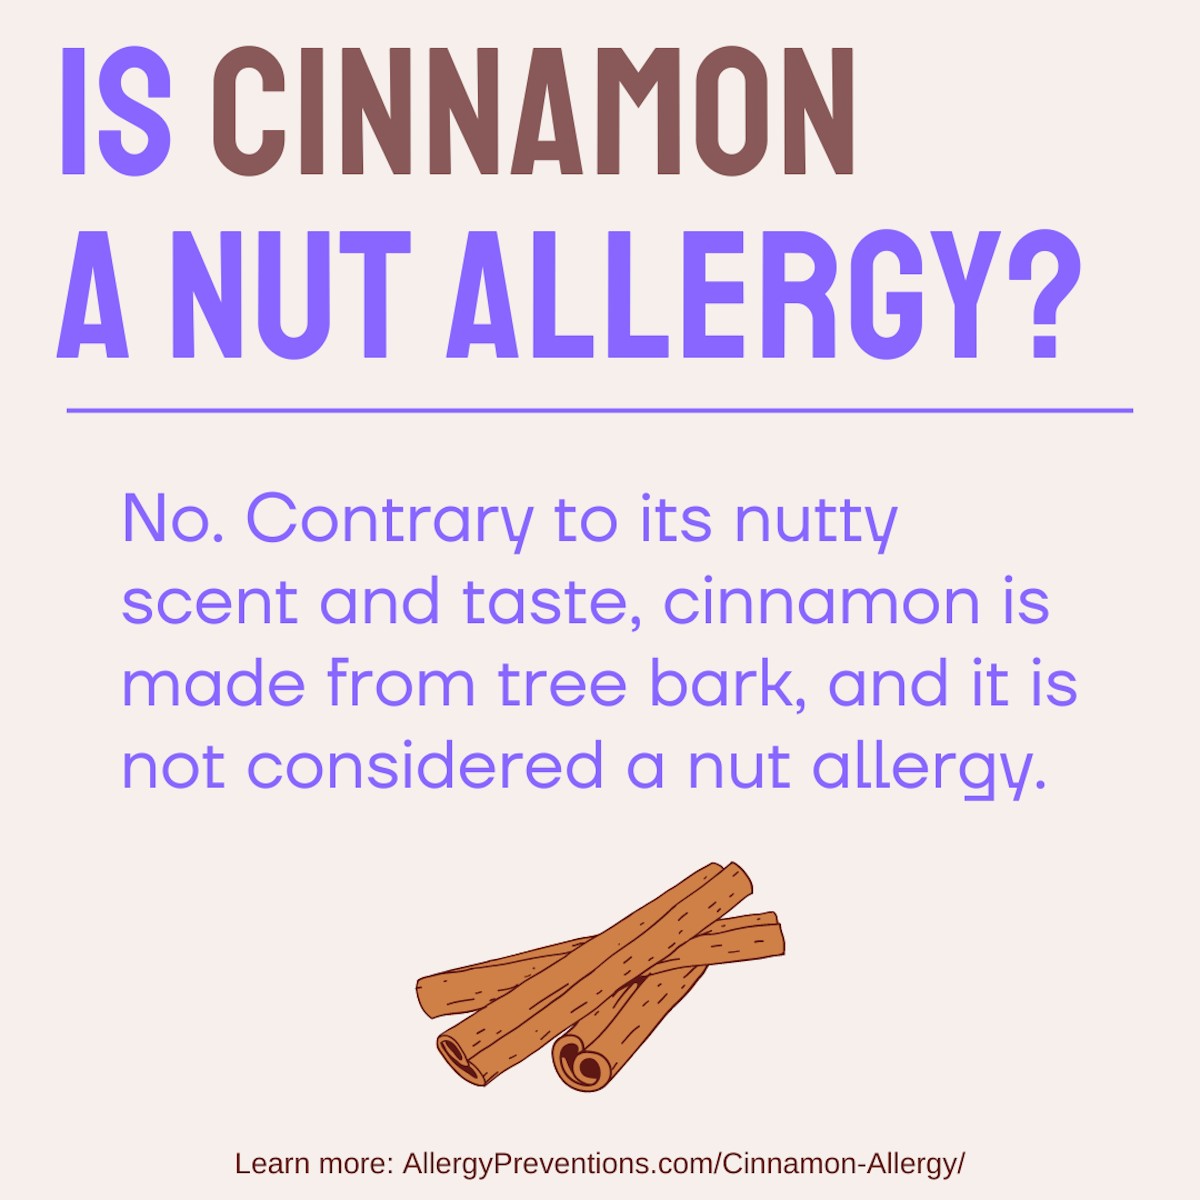 Is cinnamon a nut allergy infographic. No. Contrary to its nutty scent and taste, cinnamon is made from tree bark, and it is not considered a nut allergy.